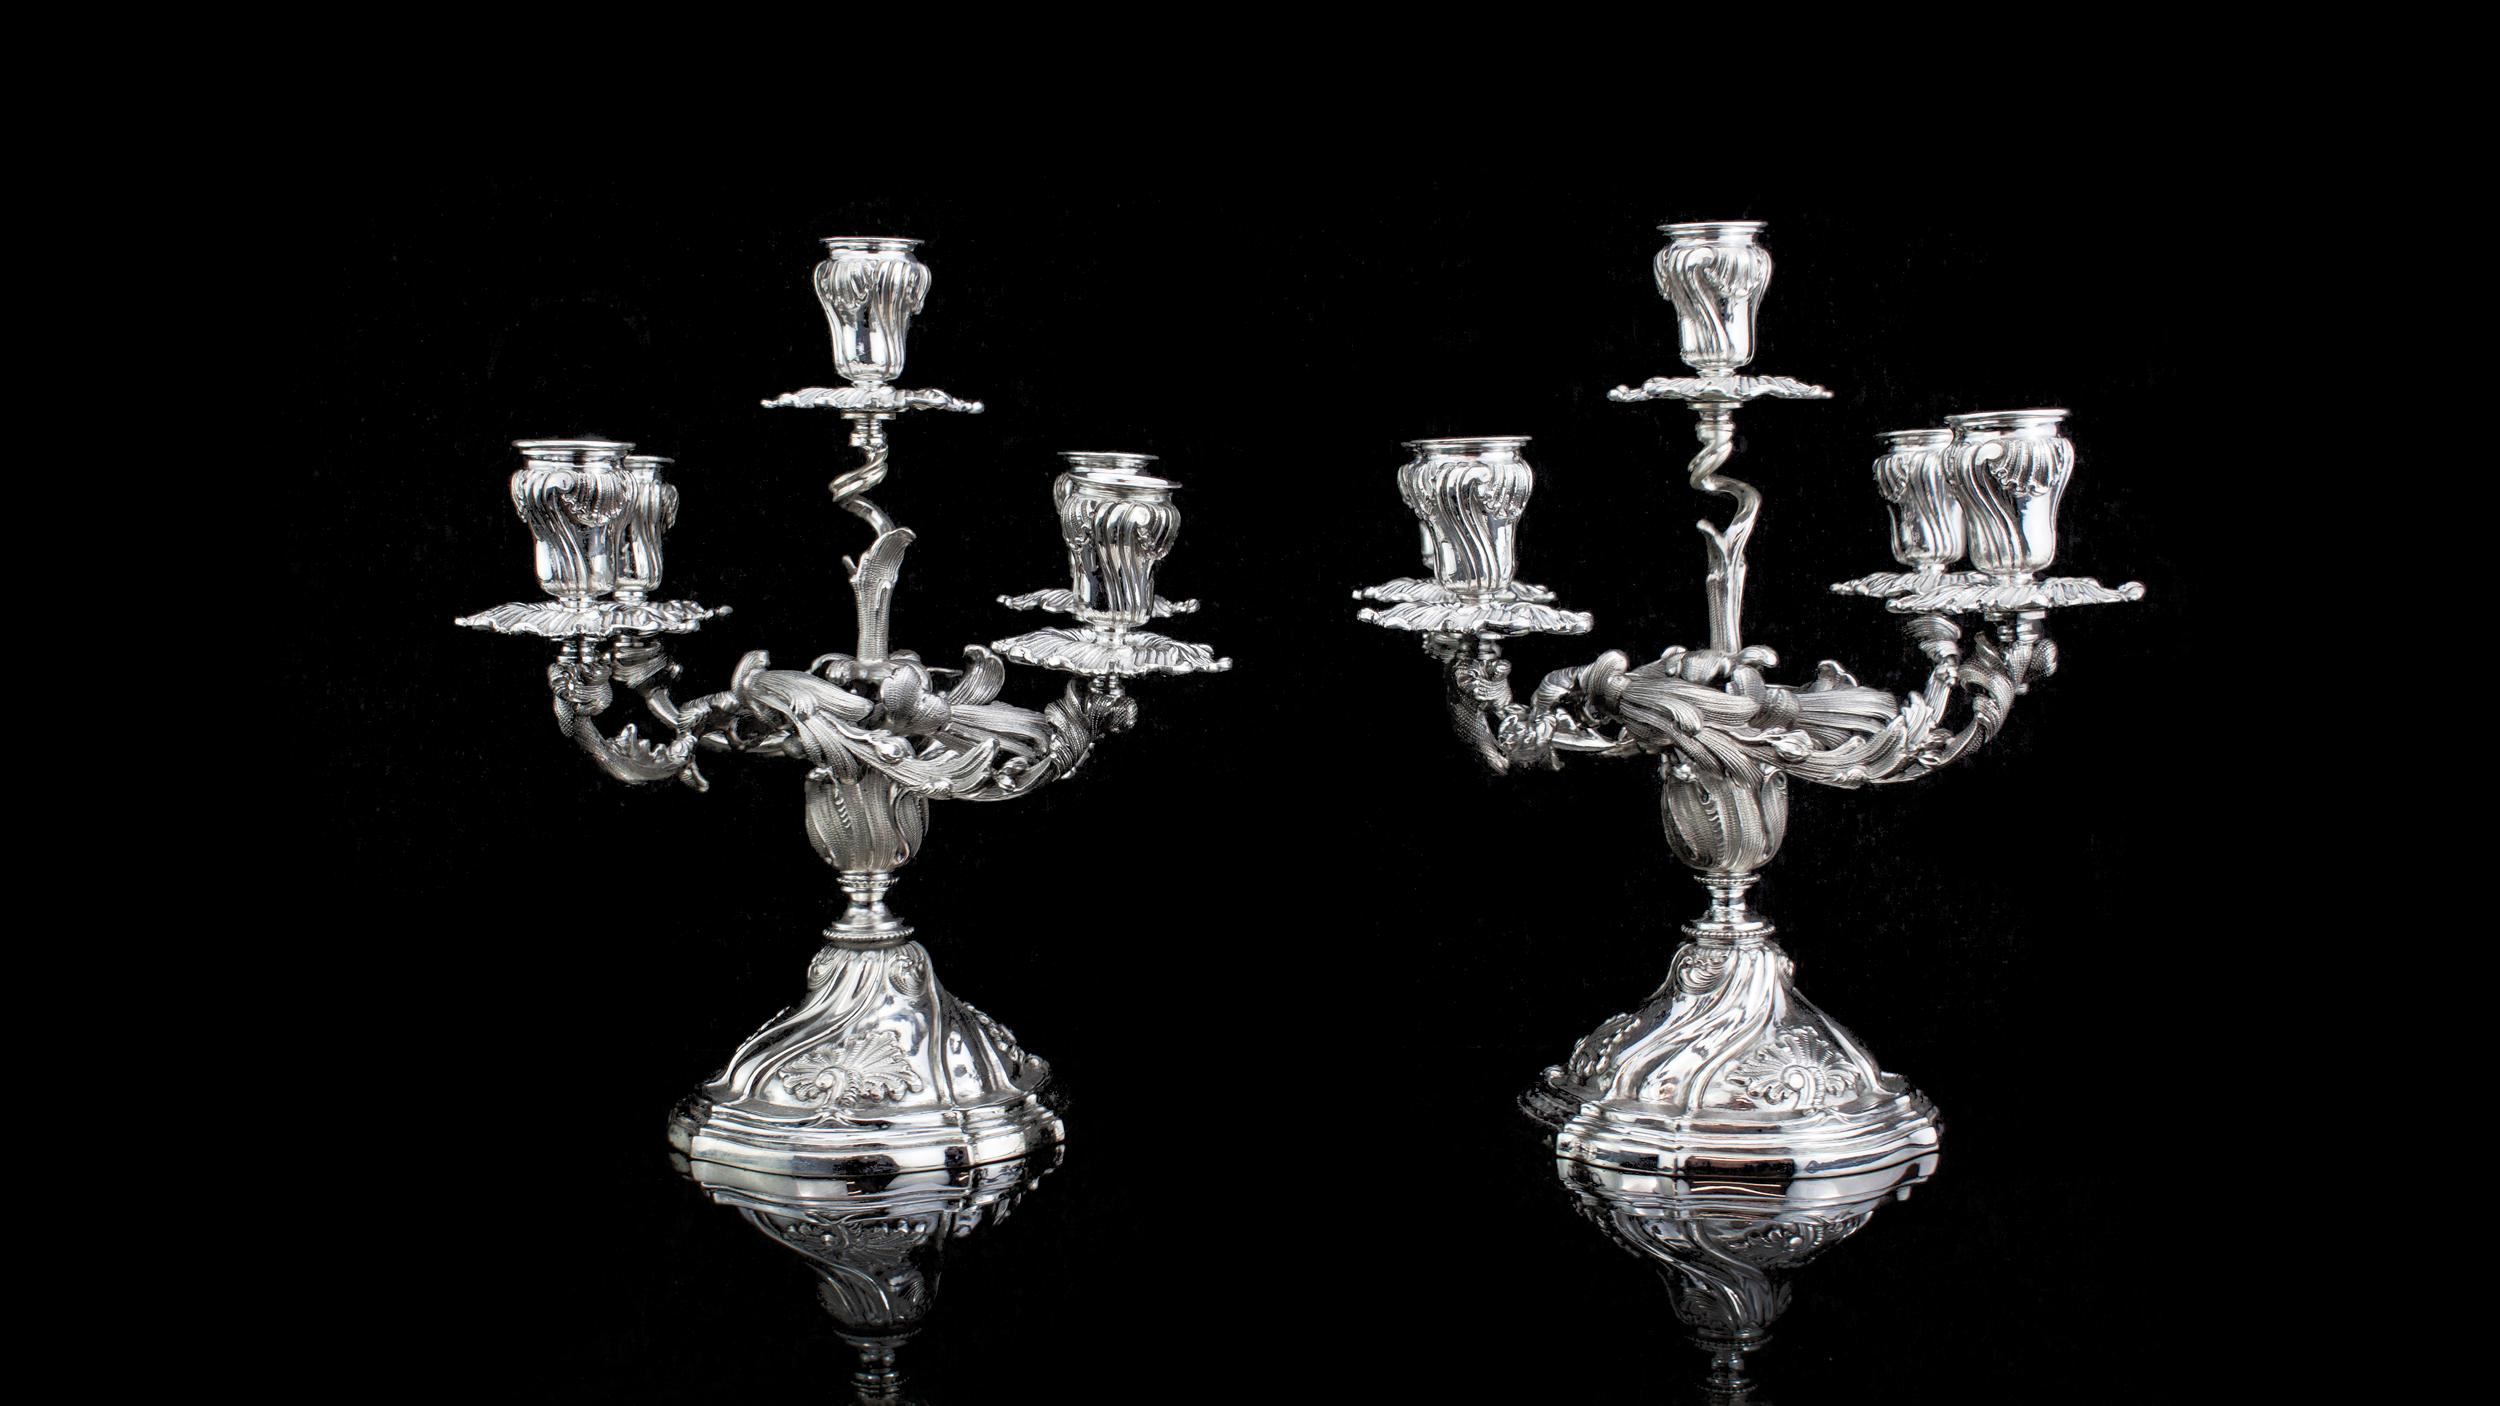 A pair of five-flame candleholders in molten, embossed and chiselled silver
Maker: Mario Buccellati
Made in Italy, 1935-1945

Dimensions:
Height 24.5 cm
Width 22.5 cm
Weight: 2761 grams total

Condition: Excellent condition, no damage.